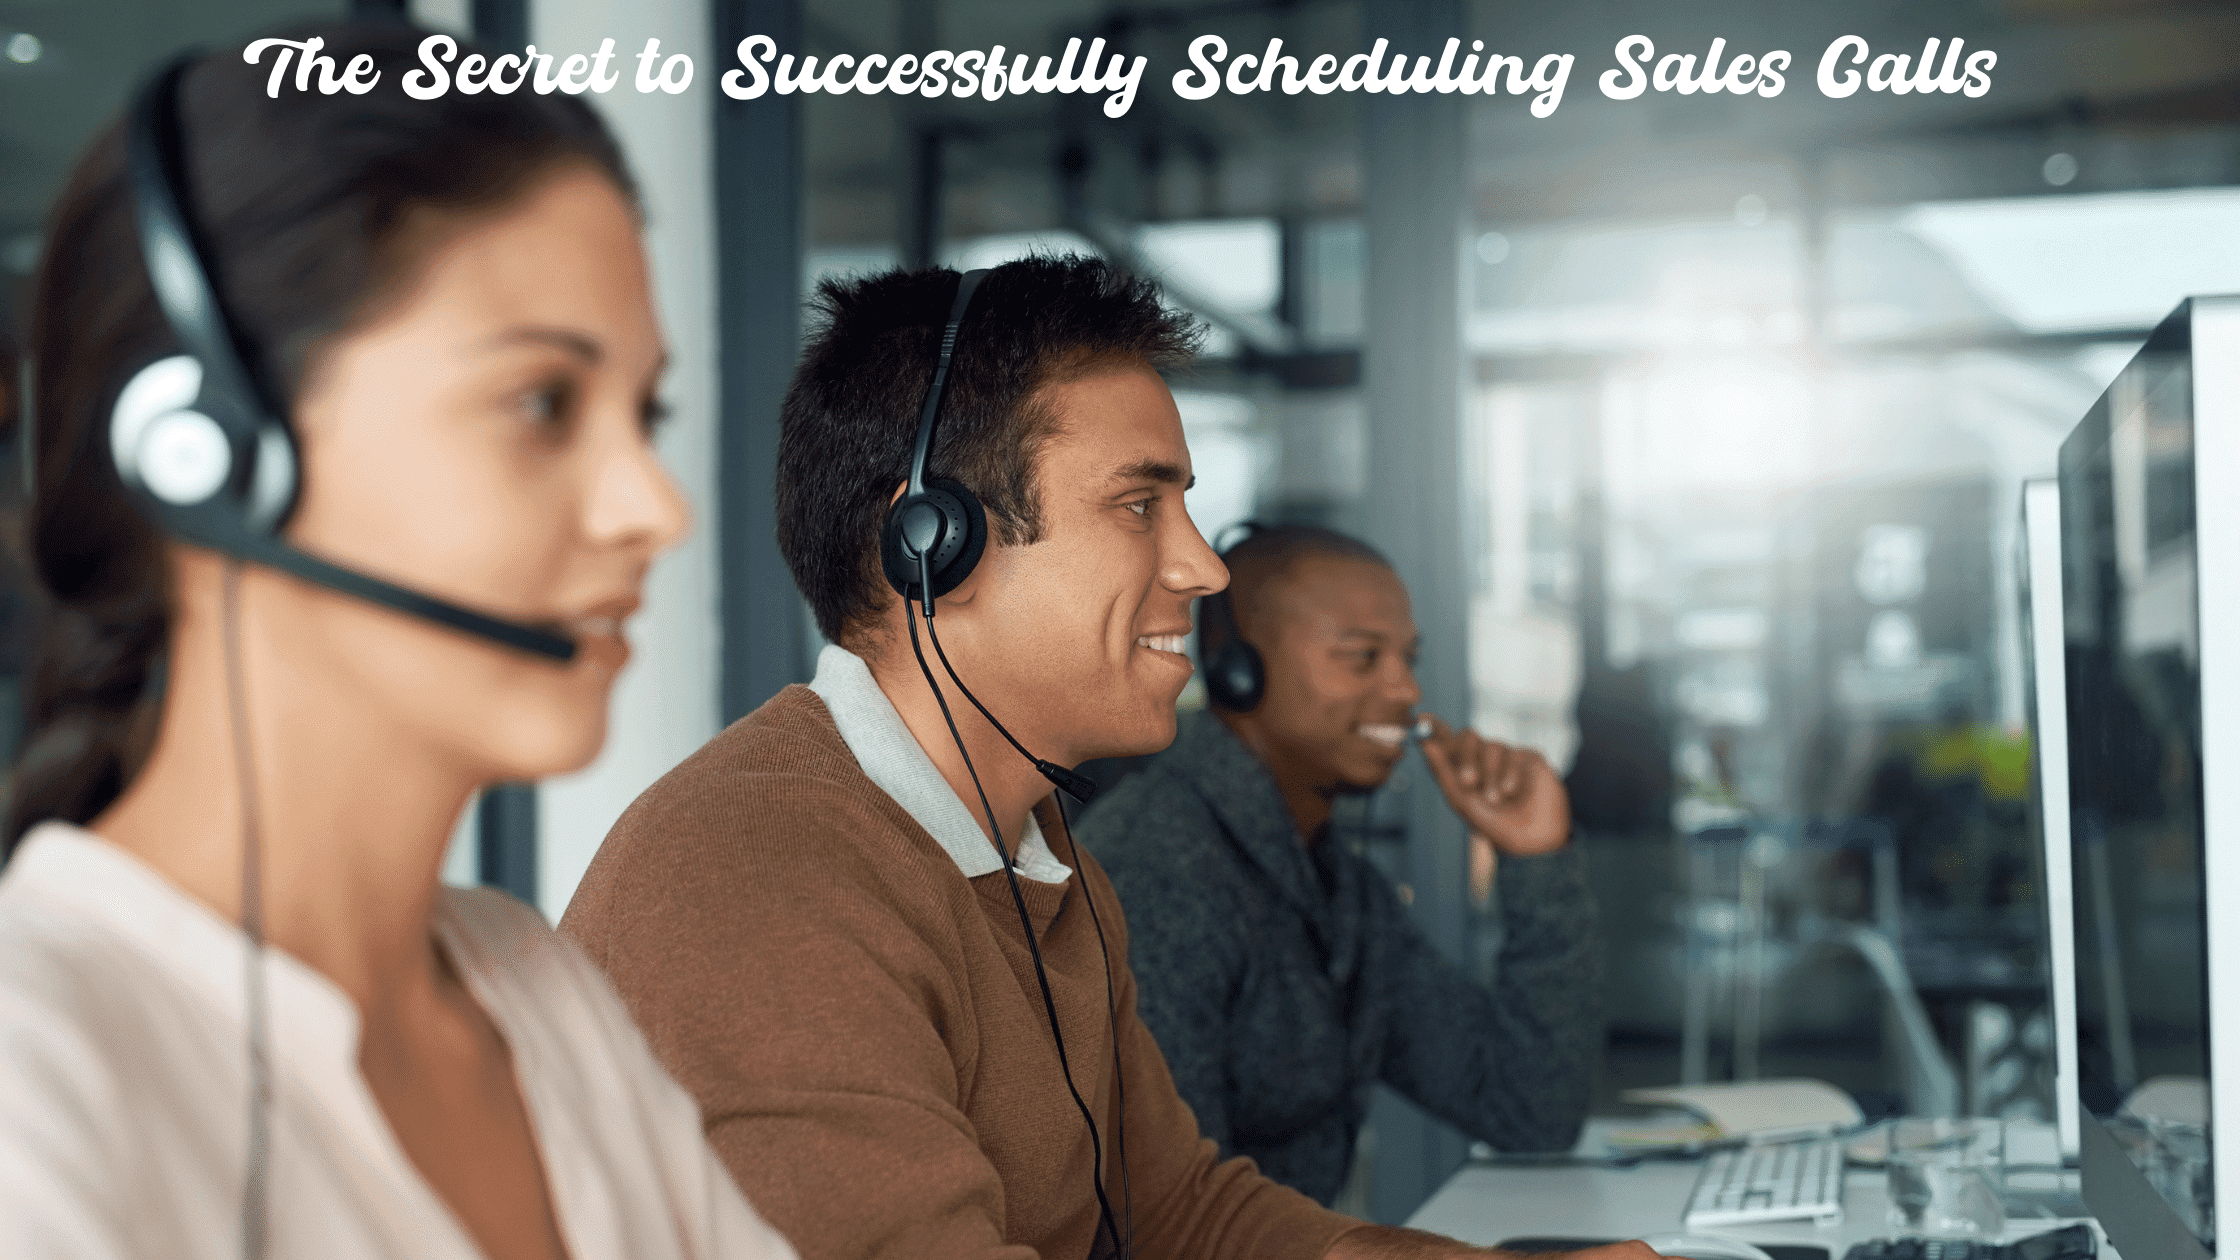 How to Effectively Schedule and Make Sales Calls